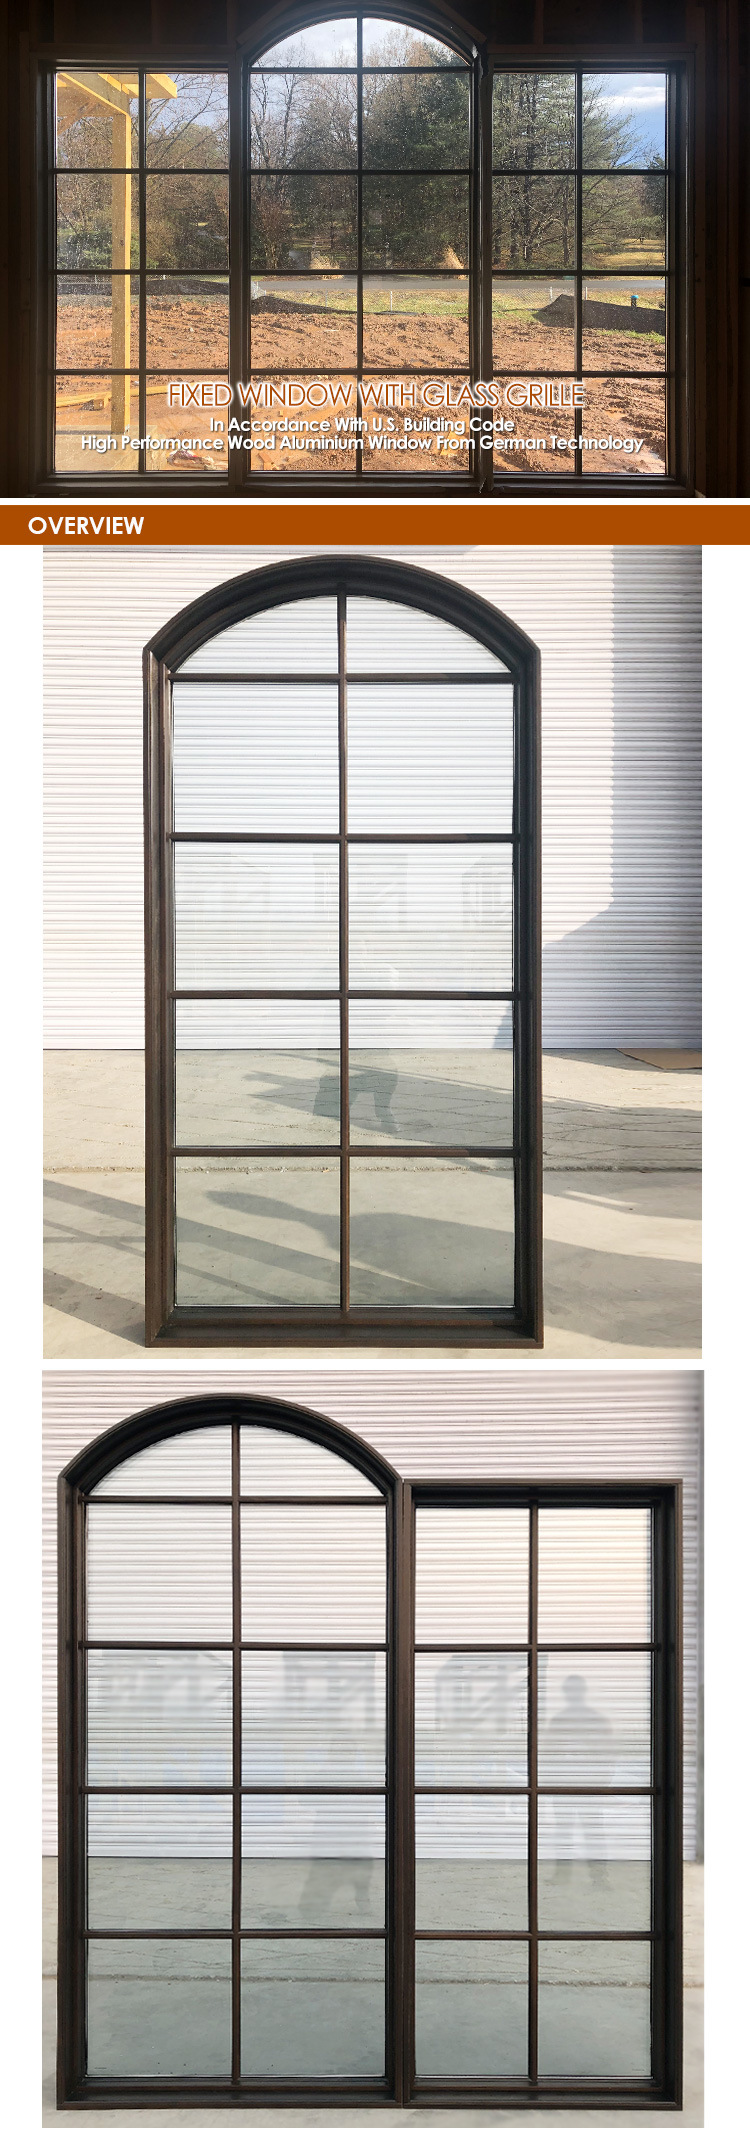 High Performance Wood Window with Aluminum Profile Triplex Grill Designed Fixed Window